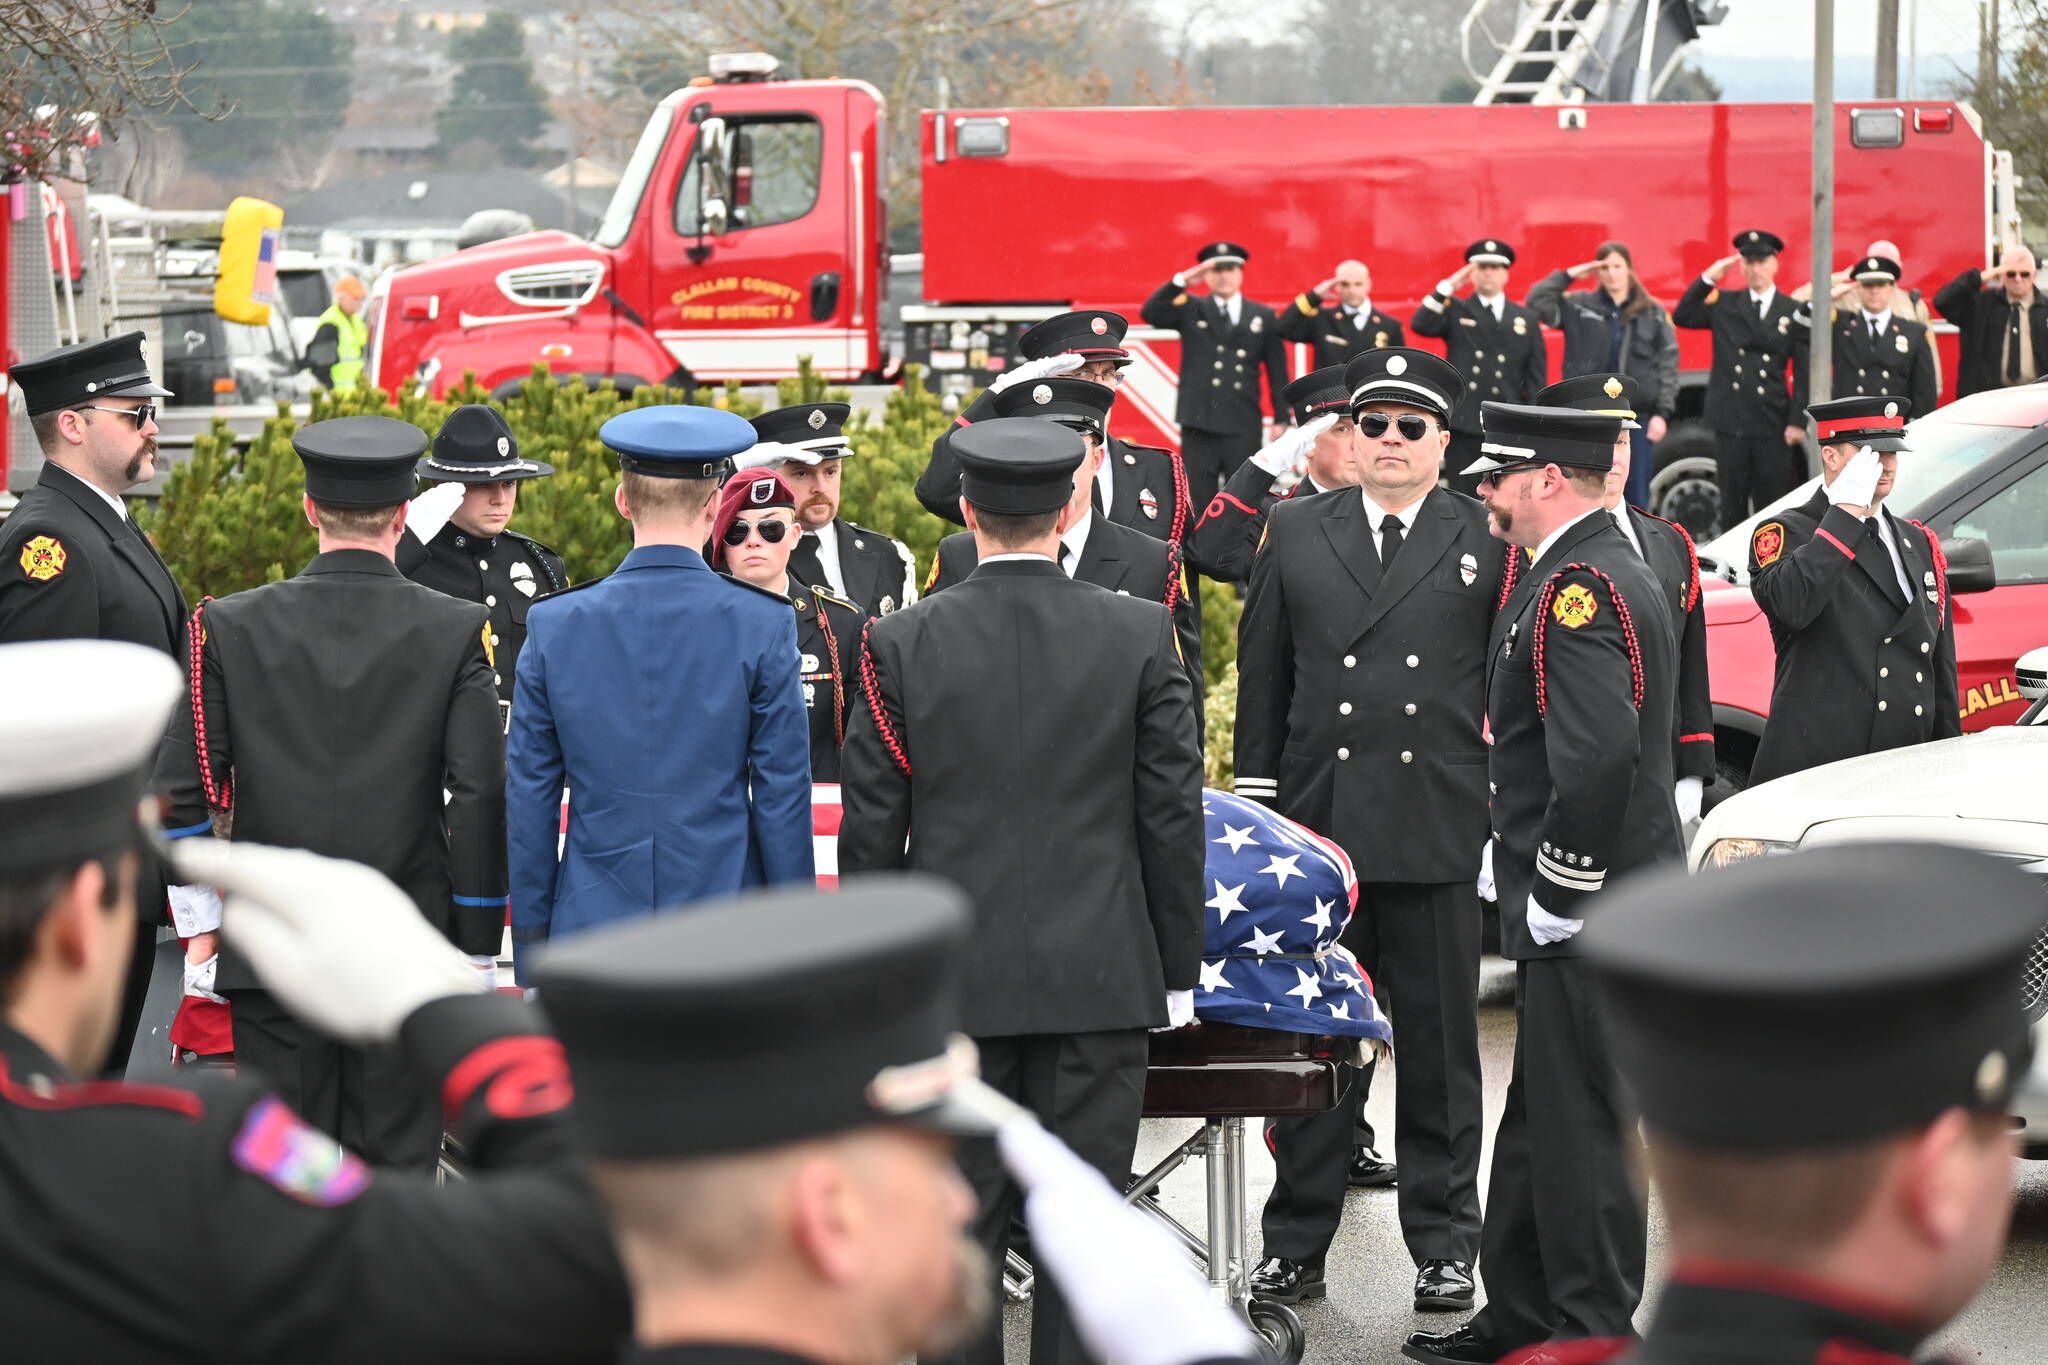 Firefighters pay tribute to Capt. Charles “Chad” Cate at a memorial service at Sequim High School on Saturday. (Michael Dashiell/Olympic Peninsula News Group)